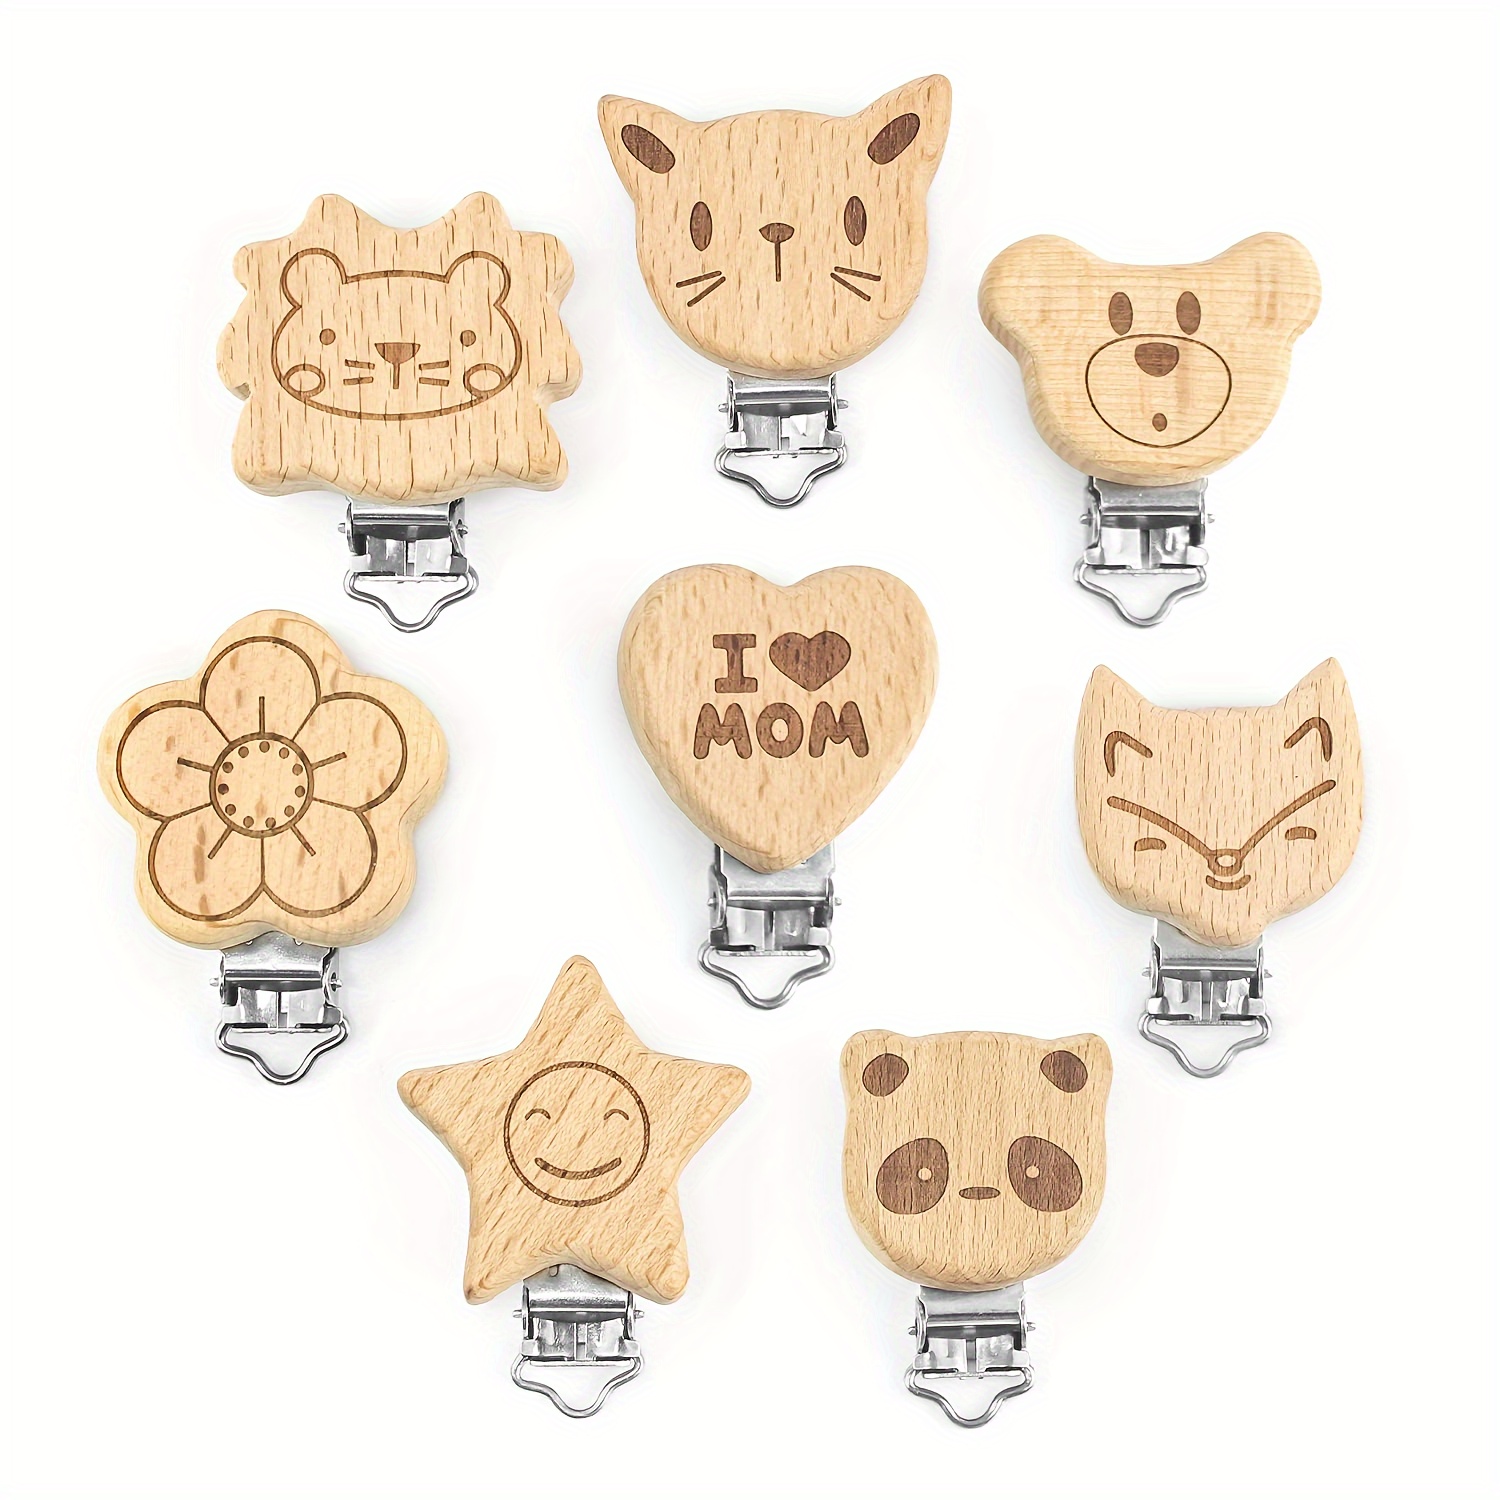 

6/8pcs Carton Wooden Clips, Beech Wood Clips, Engraved Cute Animal Designs, Heart Shaped "i Love Mom" Clip, Diy Nursing Jewelry Accessories, Universal Loop For Hanging Decors